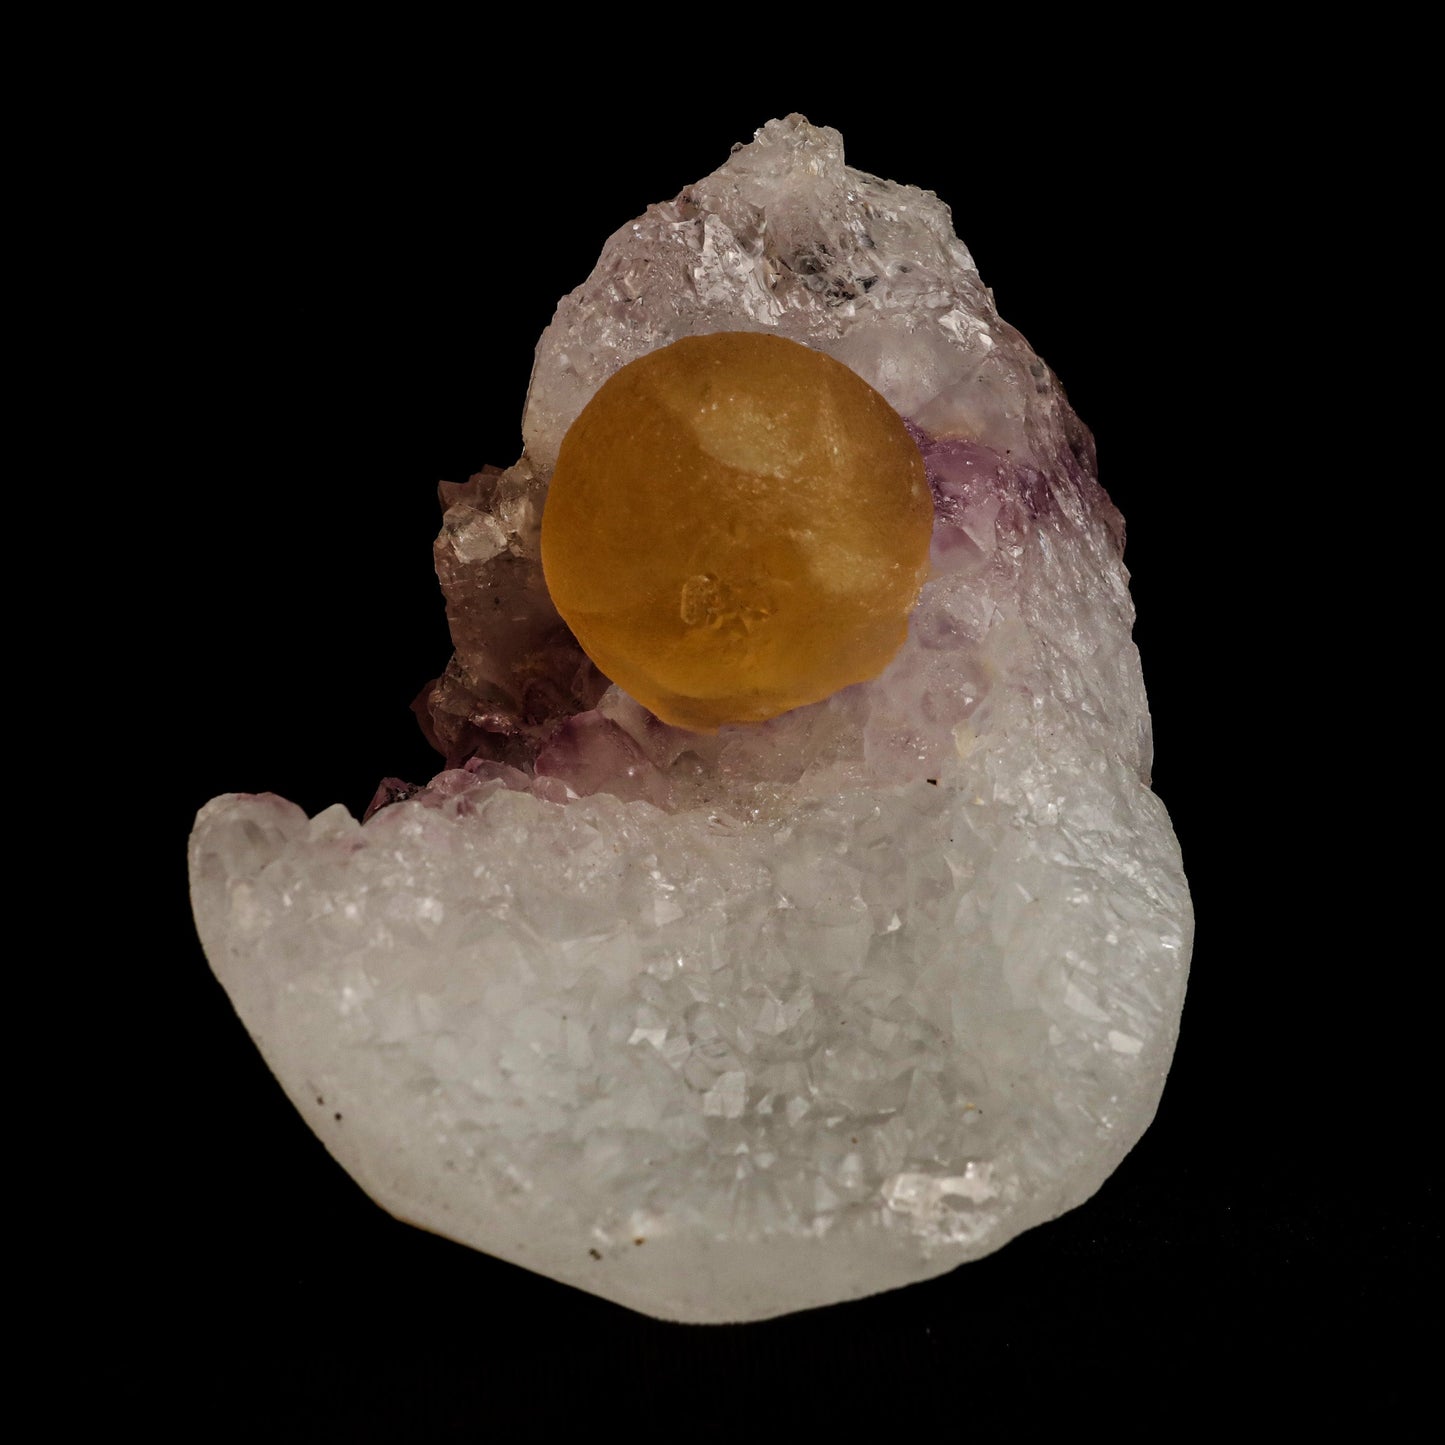 Fluorite Botryoidal on Amethyst Natural Mineral Specimen # B 5058  https://www.superbminerals.us/products/fluorite-botryoidal-on-amethyst-natural-mineral-specimen-b-5058  Features: An extraordinarily botryoidal "ball" of Fluorite is perched atop an exceptionally rich purple coloured Amethyst on Chalcedony and host rock matrix, creating an unusually beautiful specimen.&nbsp; On the surface, the Fluorite is a creamy-white tone that gradually fades away to a golden hue in the middle.